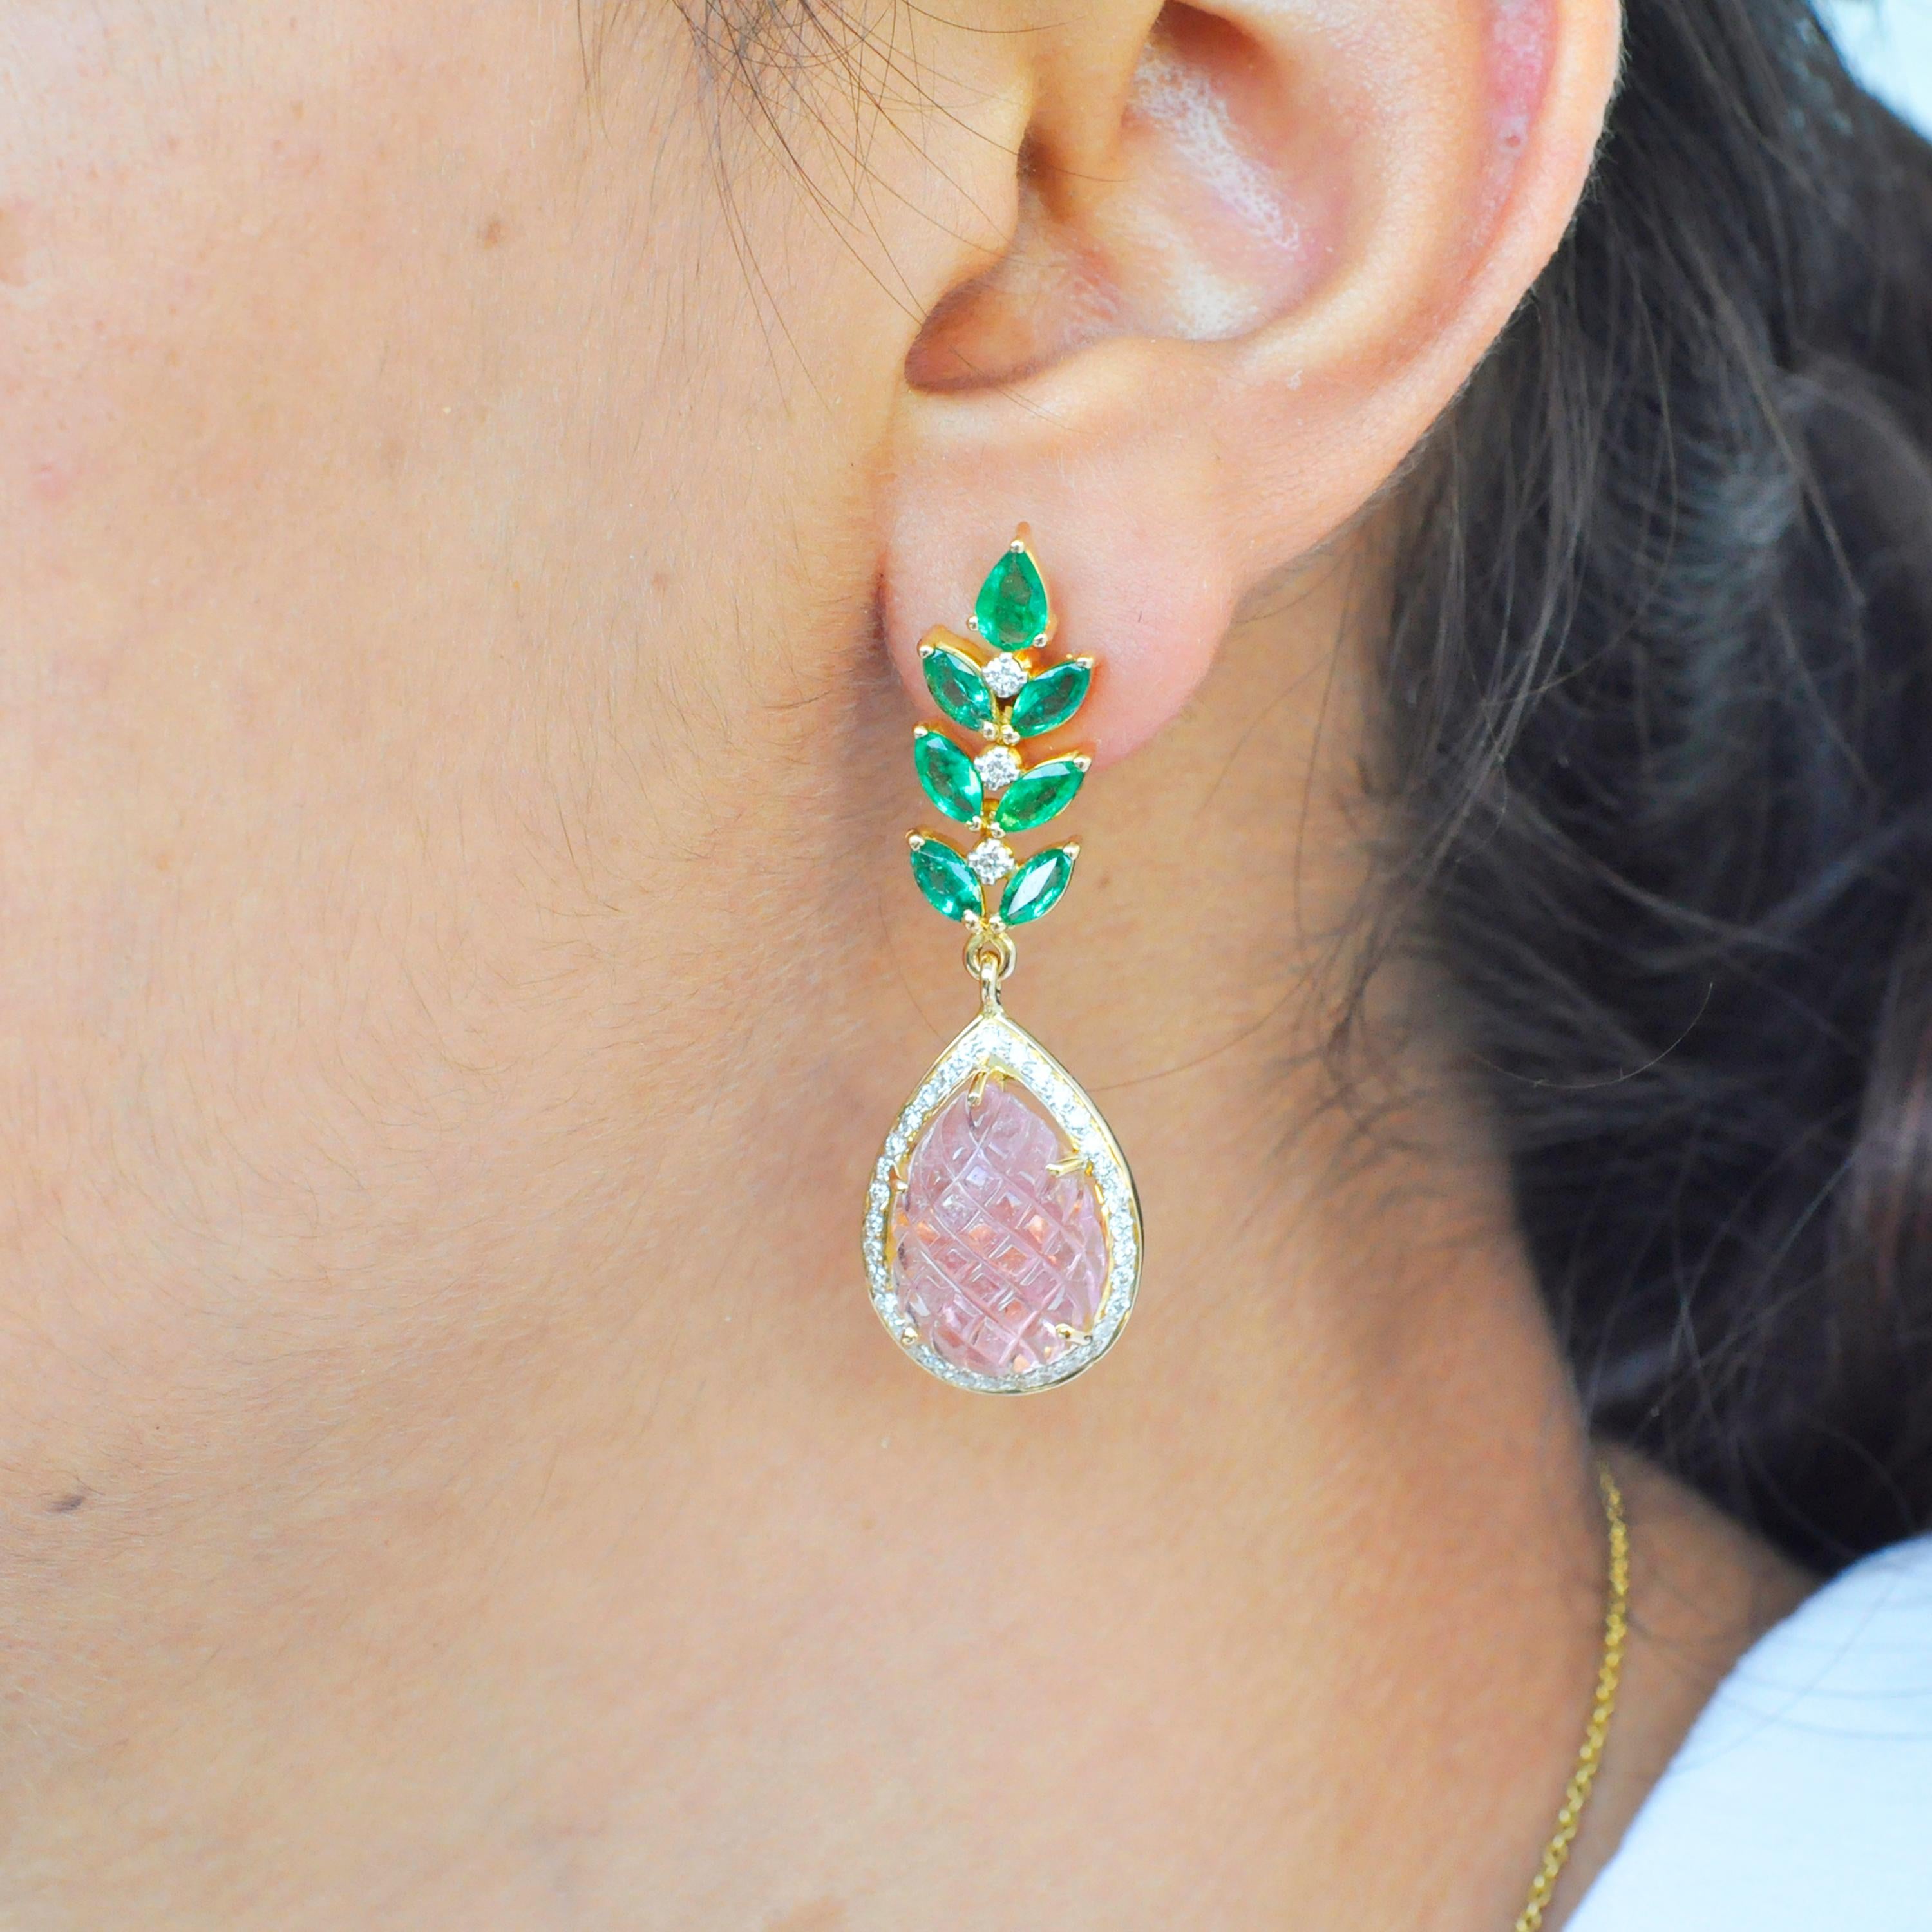 Elegance at its best, these hand-carved pineapple cut pear shaped pink tourmaline carvings are accentuated with diamonds and emeralds, set in 18K yellow gold. The pink tourmaline carving gives out a baby pink color, complimenting perfectly with the